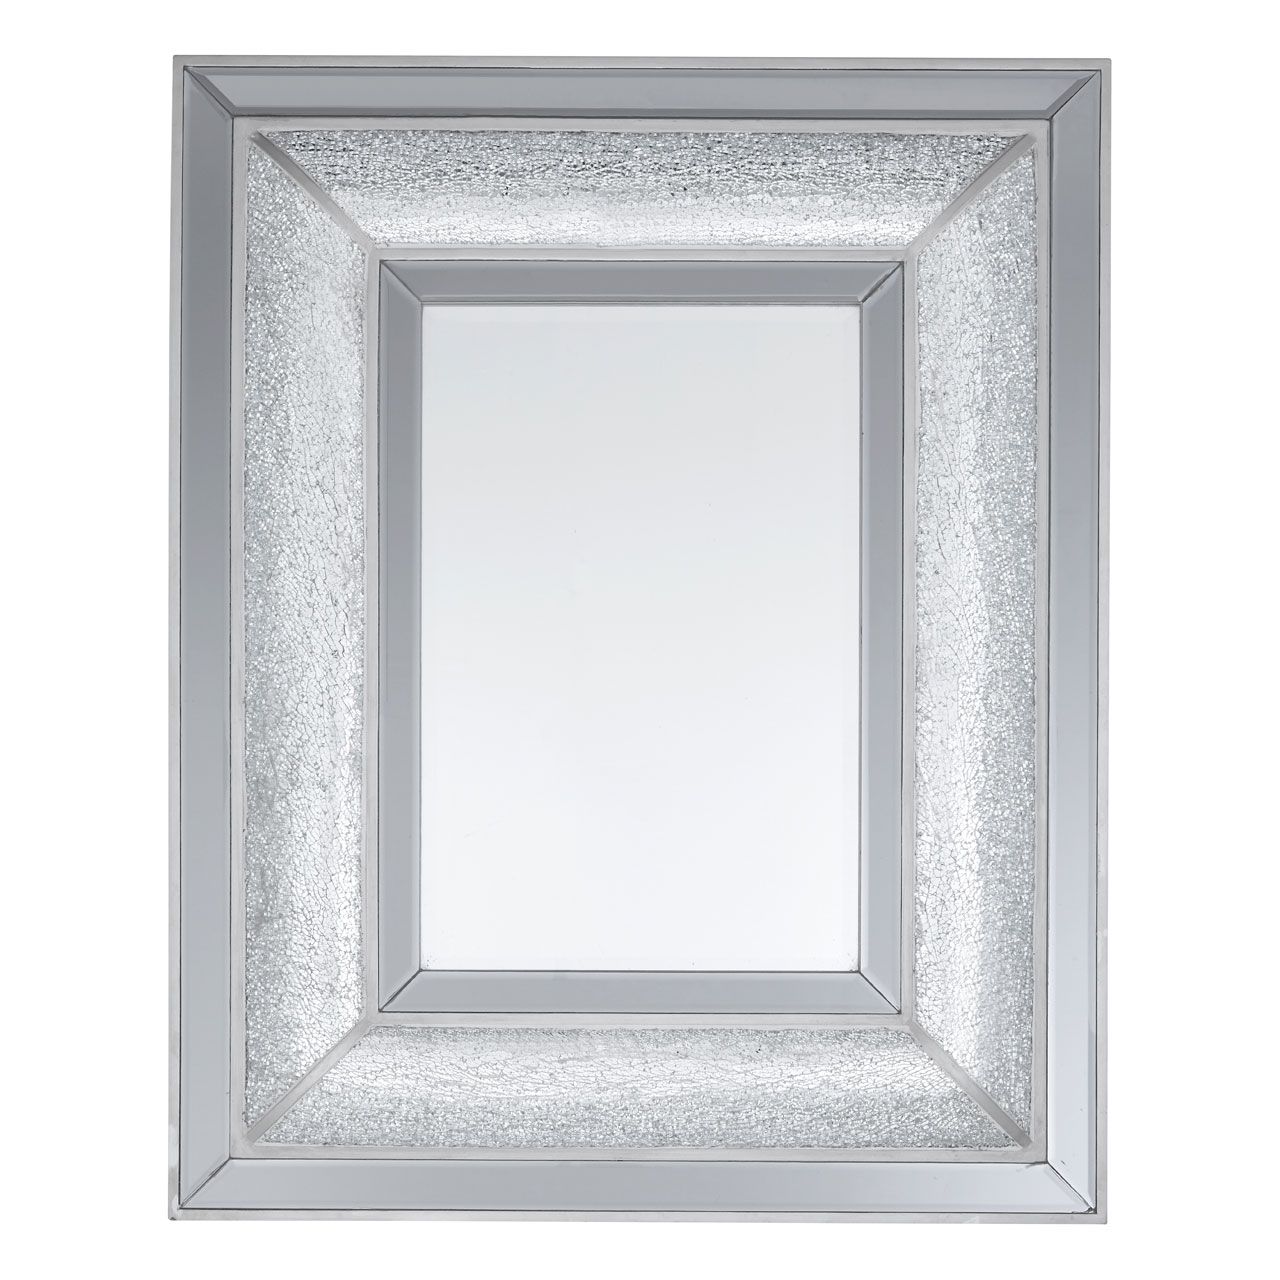 82 X 102cm Wendi Silver Mosaic Wall Mirror With Regard To Popular Mosaic Wall Mirrors (View 9 of 20)